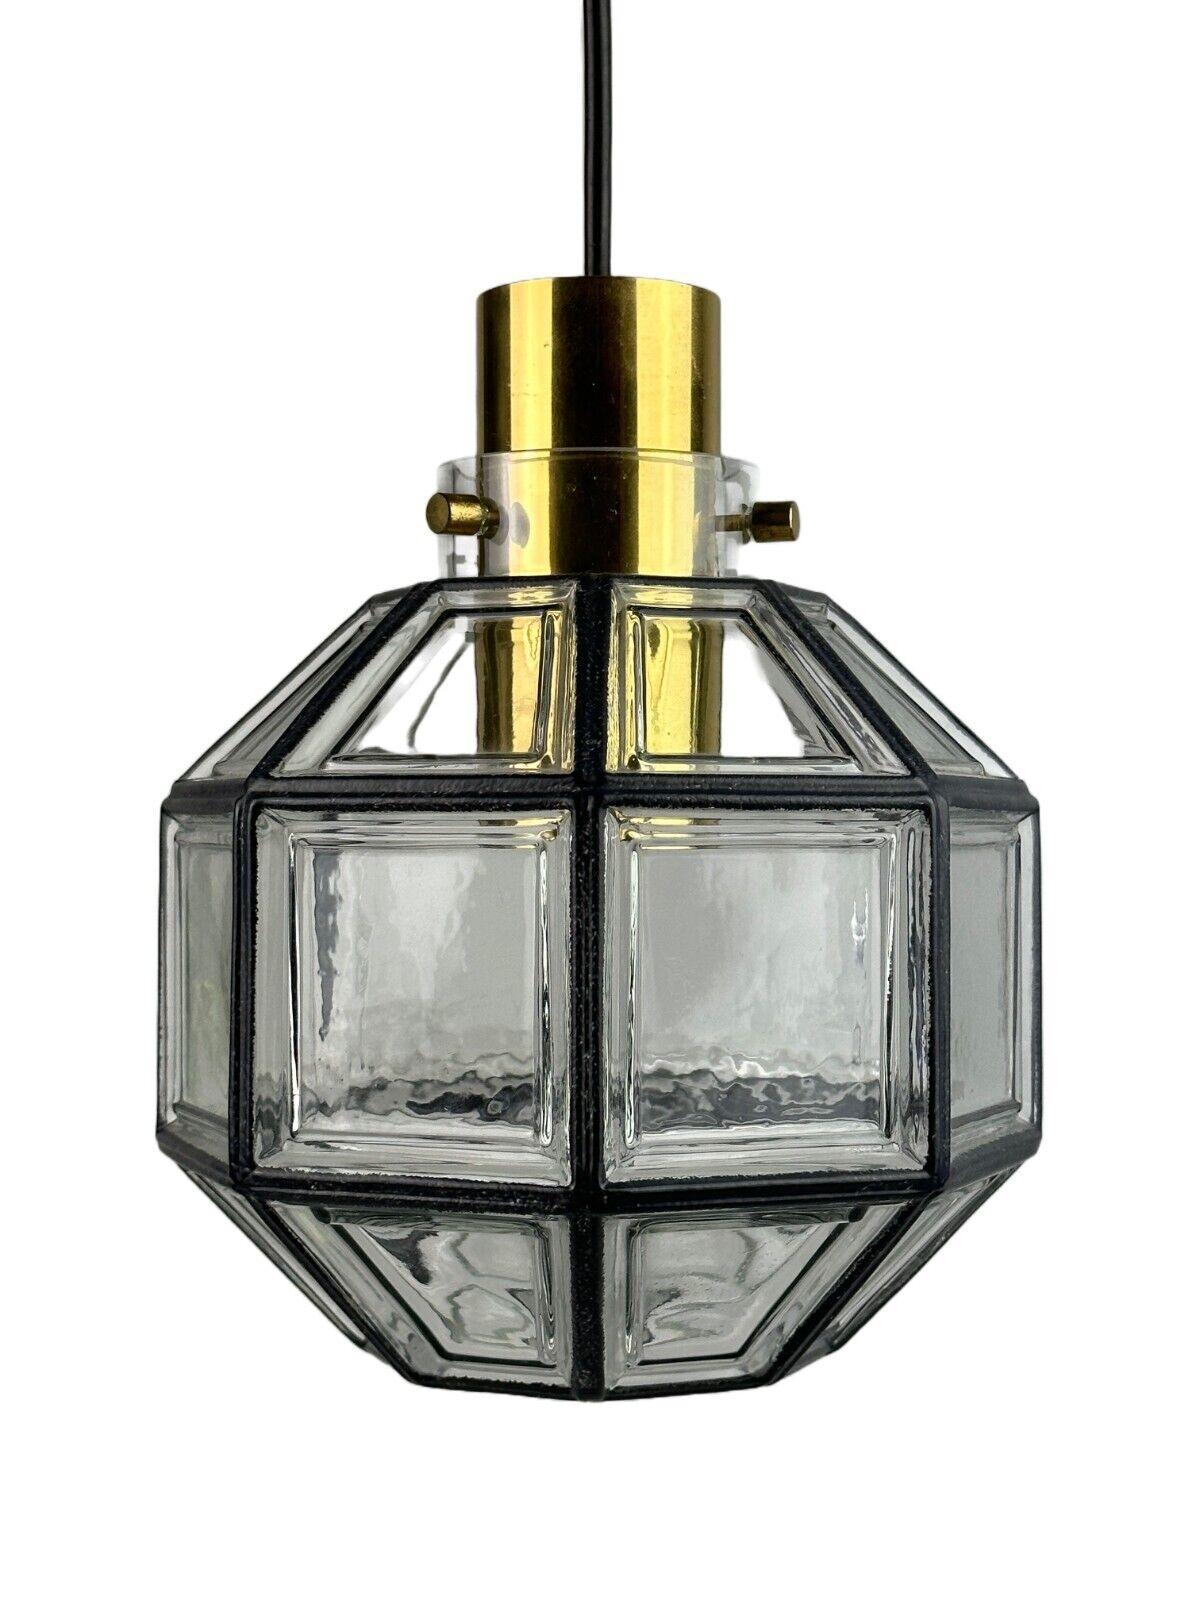 60s 70s lamp light ceiling lamp Limburg glass space age design 60s 70s

Object: ceiling lamp

Manufacturer: Glashütte Limburg

Condition: good

Age: around 1960-1970

Dimensions:

Diameter = 21.5cm
Height = 26cm

Other notes:

E27 socket

The